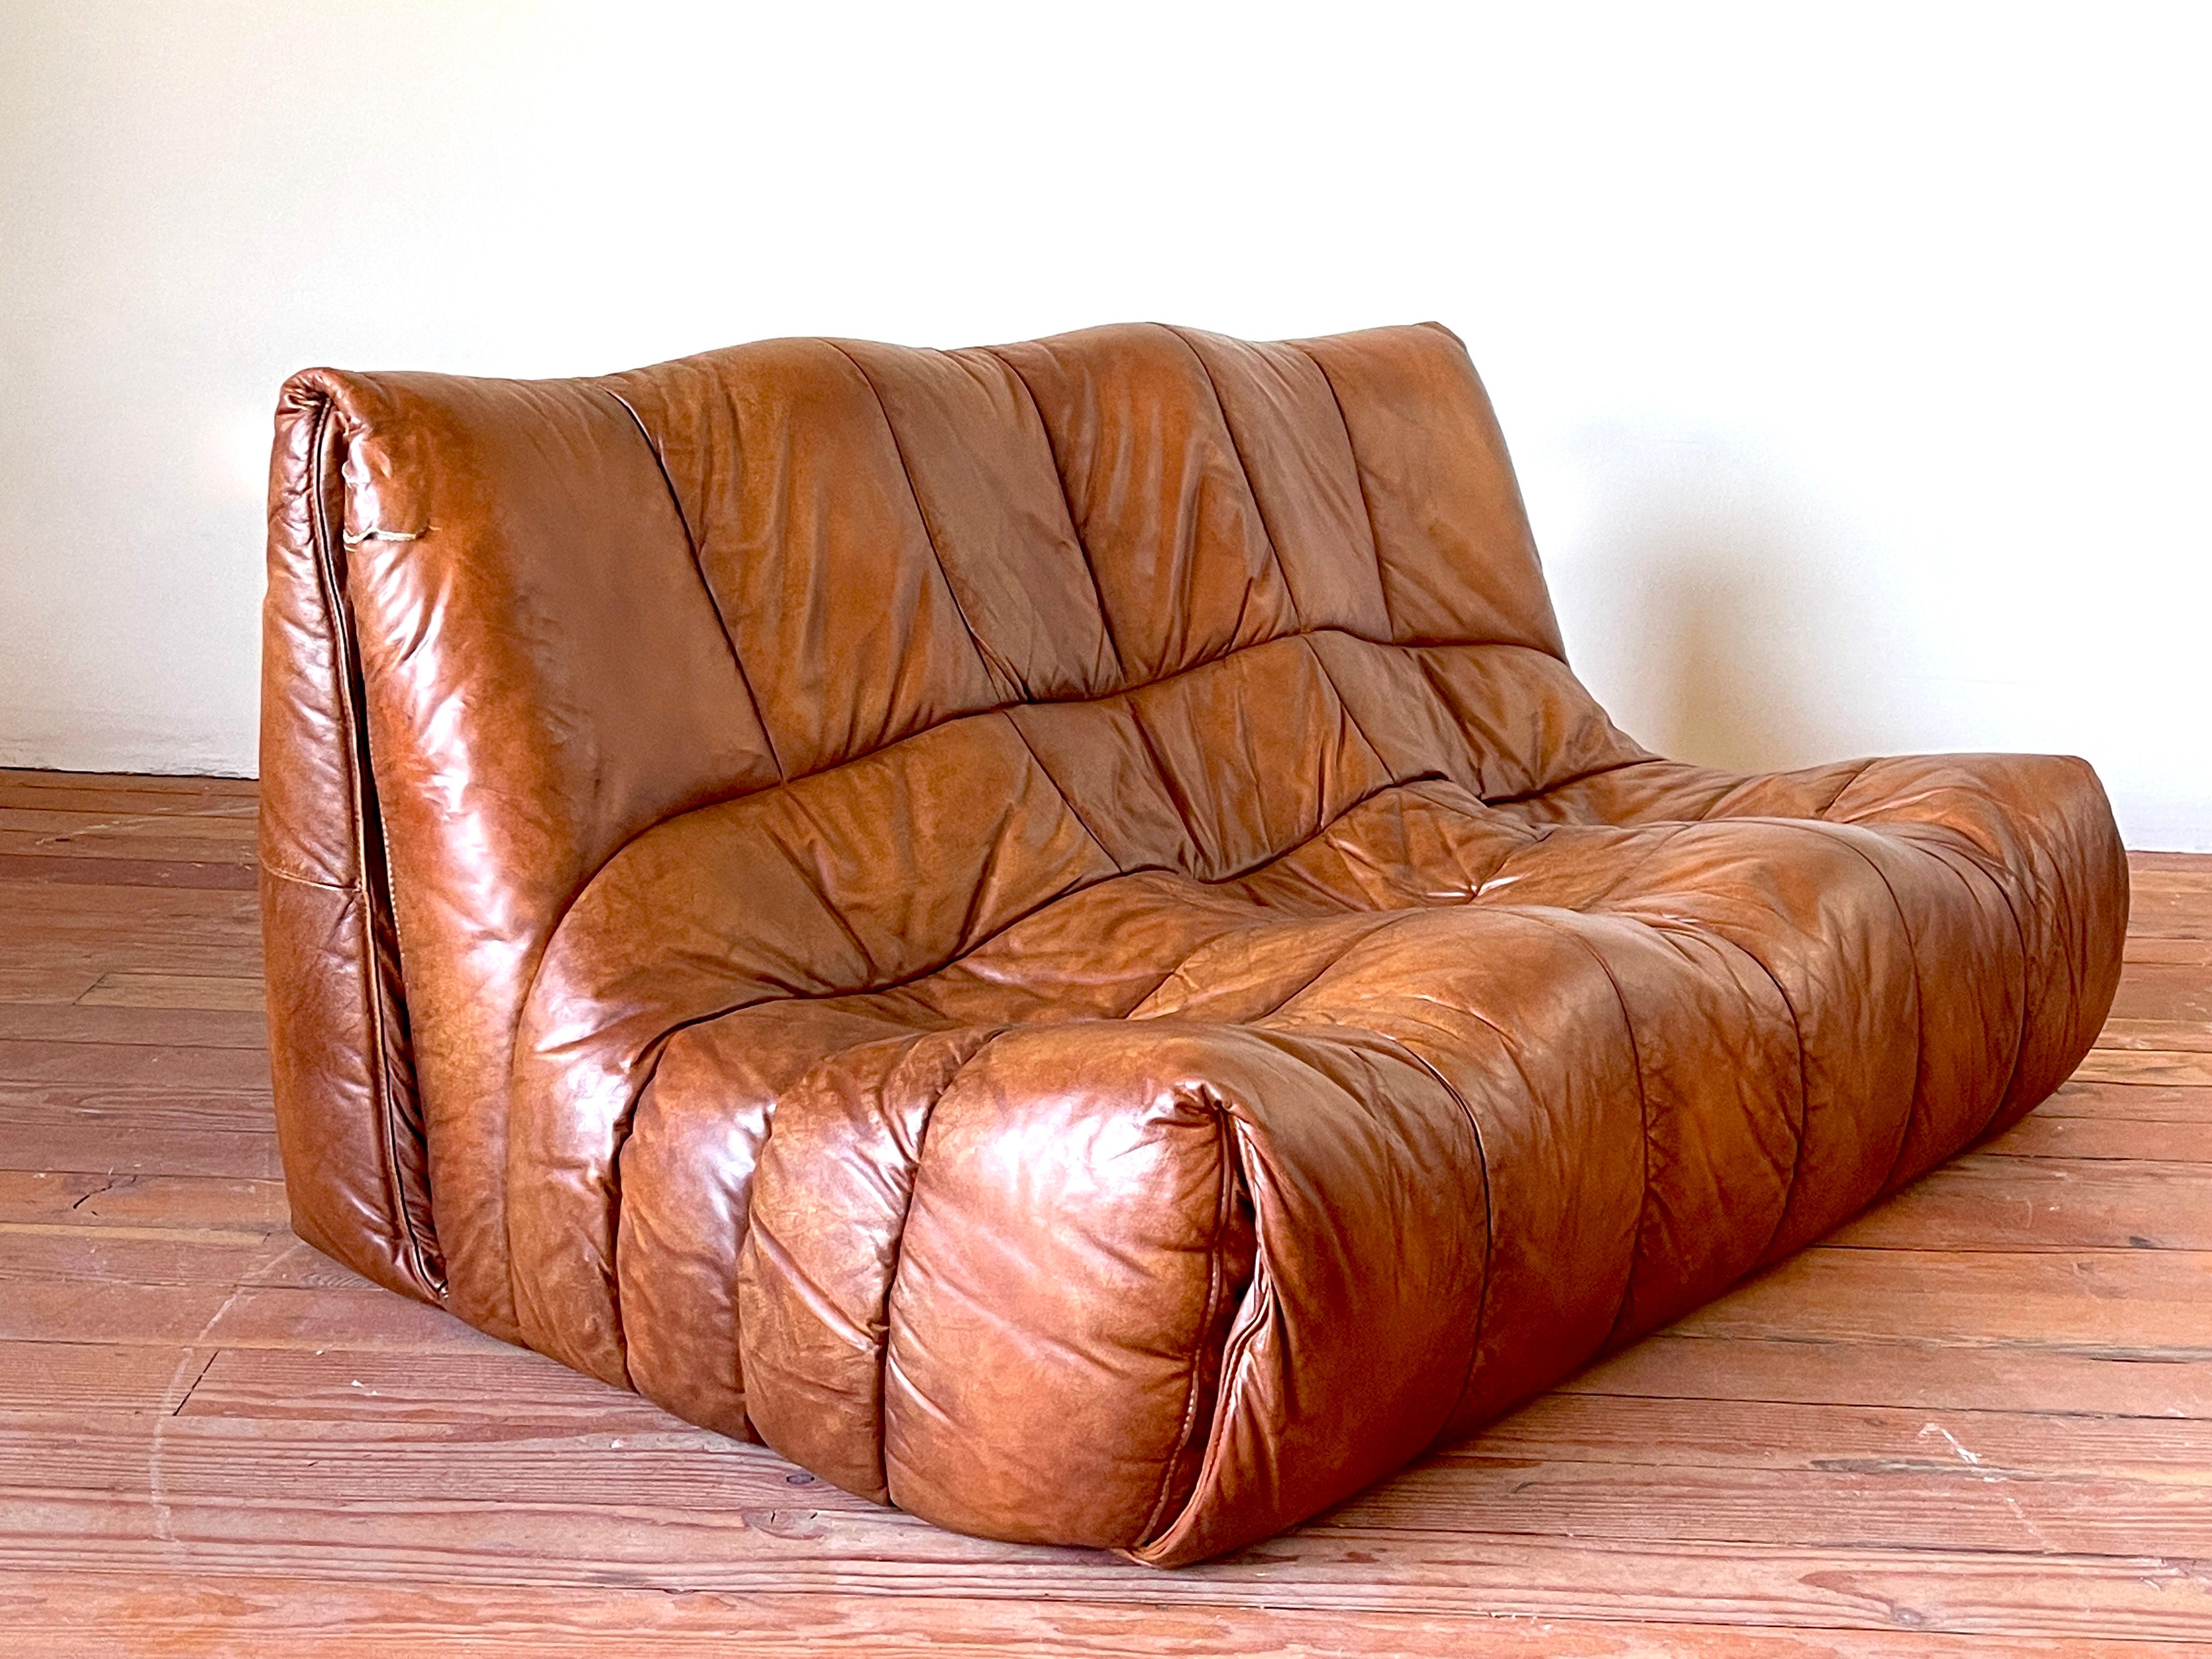 Leather settee by Roche Bobois in the style of 